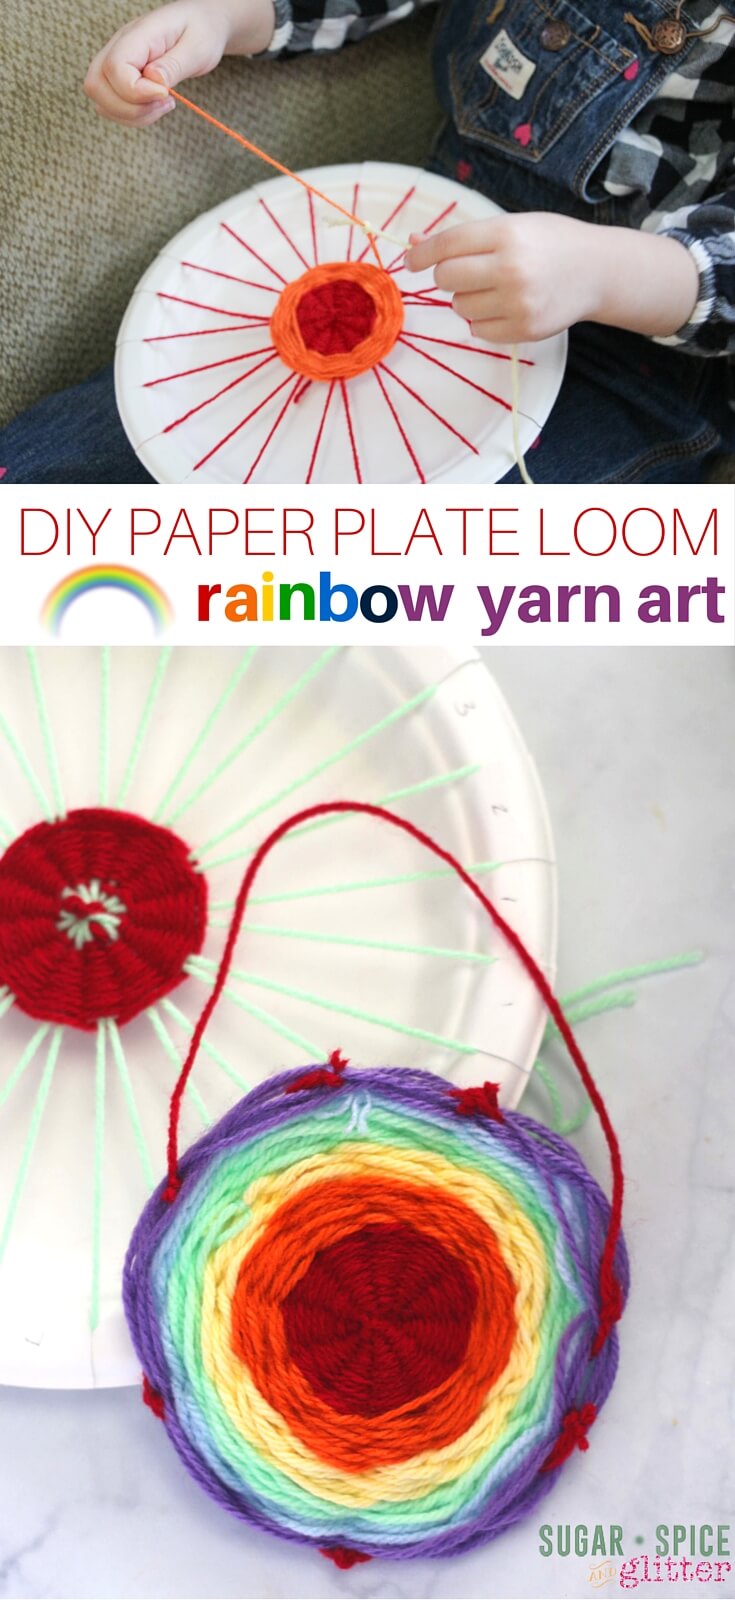 Learn how to make a paper plate loom for this rainbow yarn art project! This DIY loom is perfect for young kids as soon a they know how to tie a knot - a gorgeous rainbow craft idea for kids!